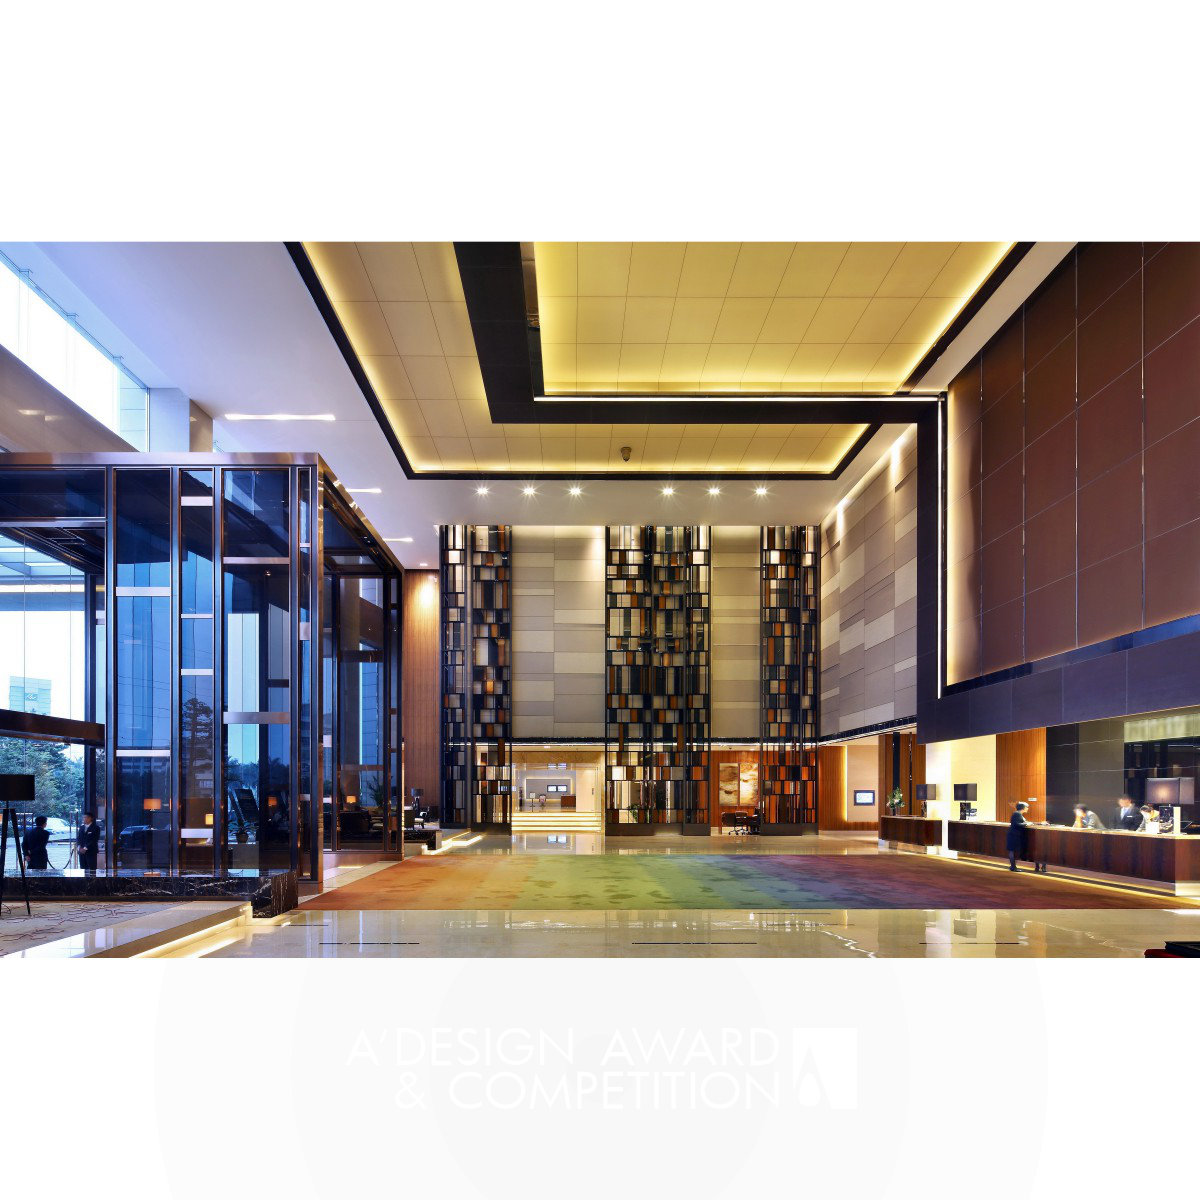 Pullman Dongguan Changan Hotel Business and Leisure Hospitality by Arthur Wing Fat Chan